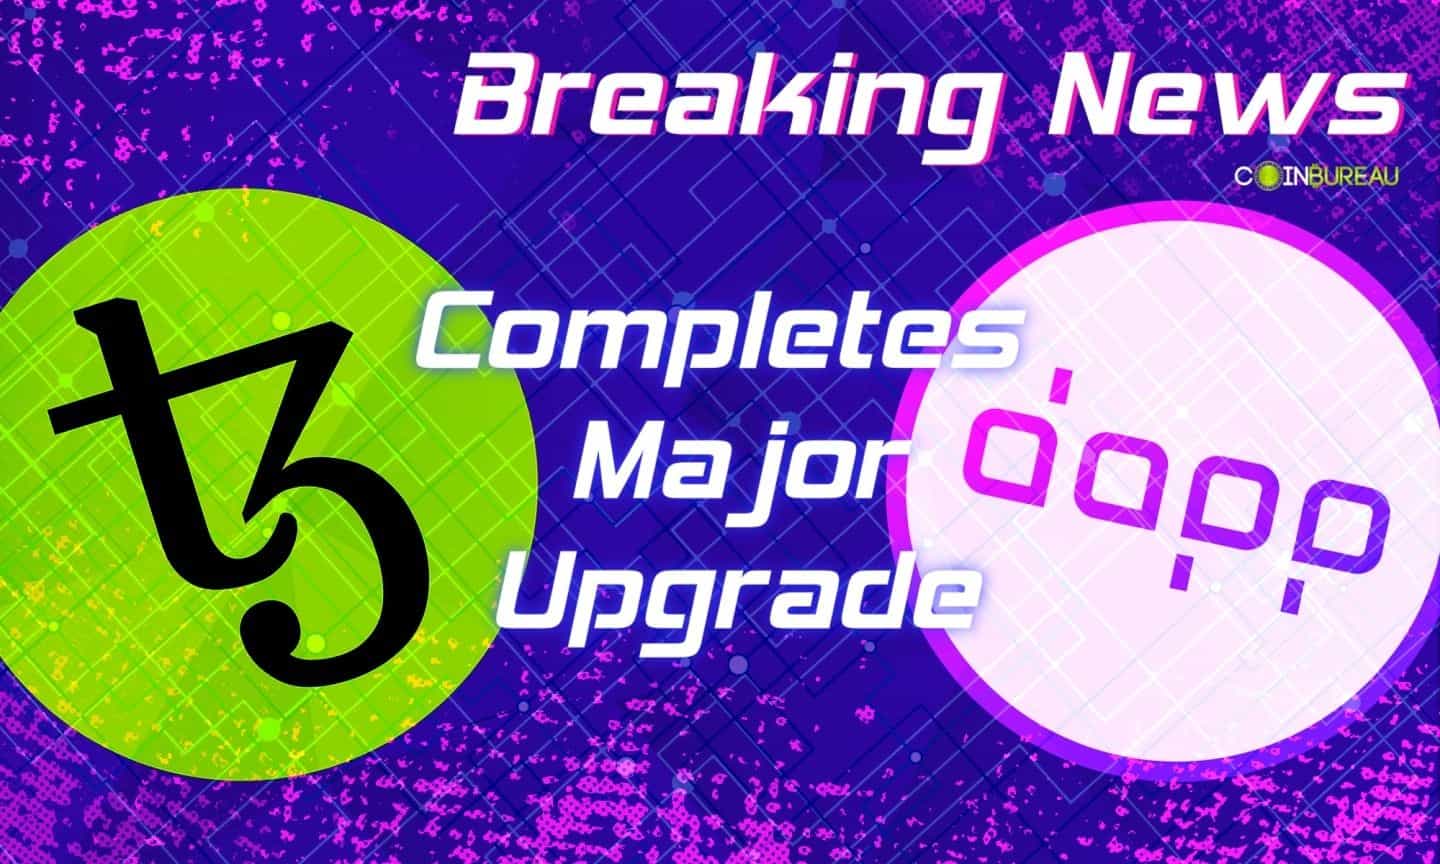 Tezos Completes Major Upgrade that Increases Decentralization and Improves DApps